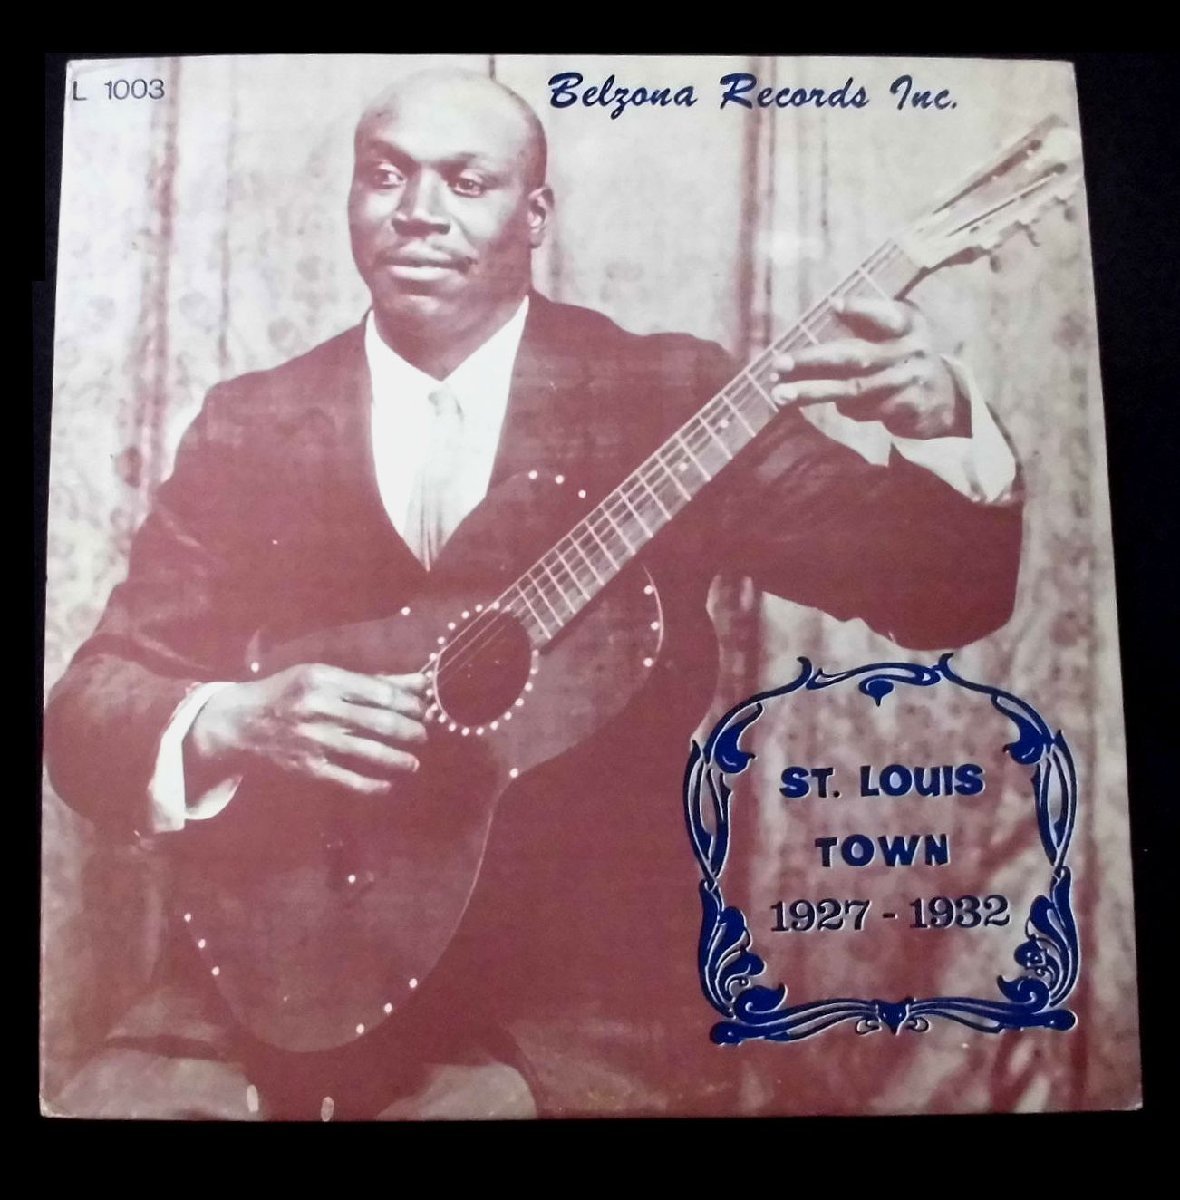 ●US-Belzona Recordsオリジナル””First-Pressing,EX+:EX Copy!!”” St. Louis Town: 1927-1932